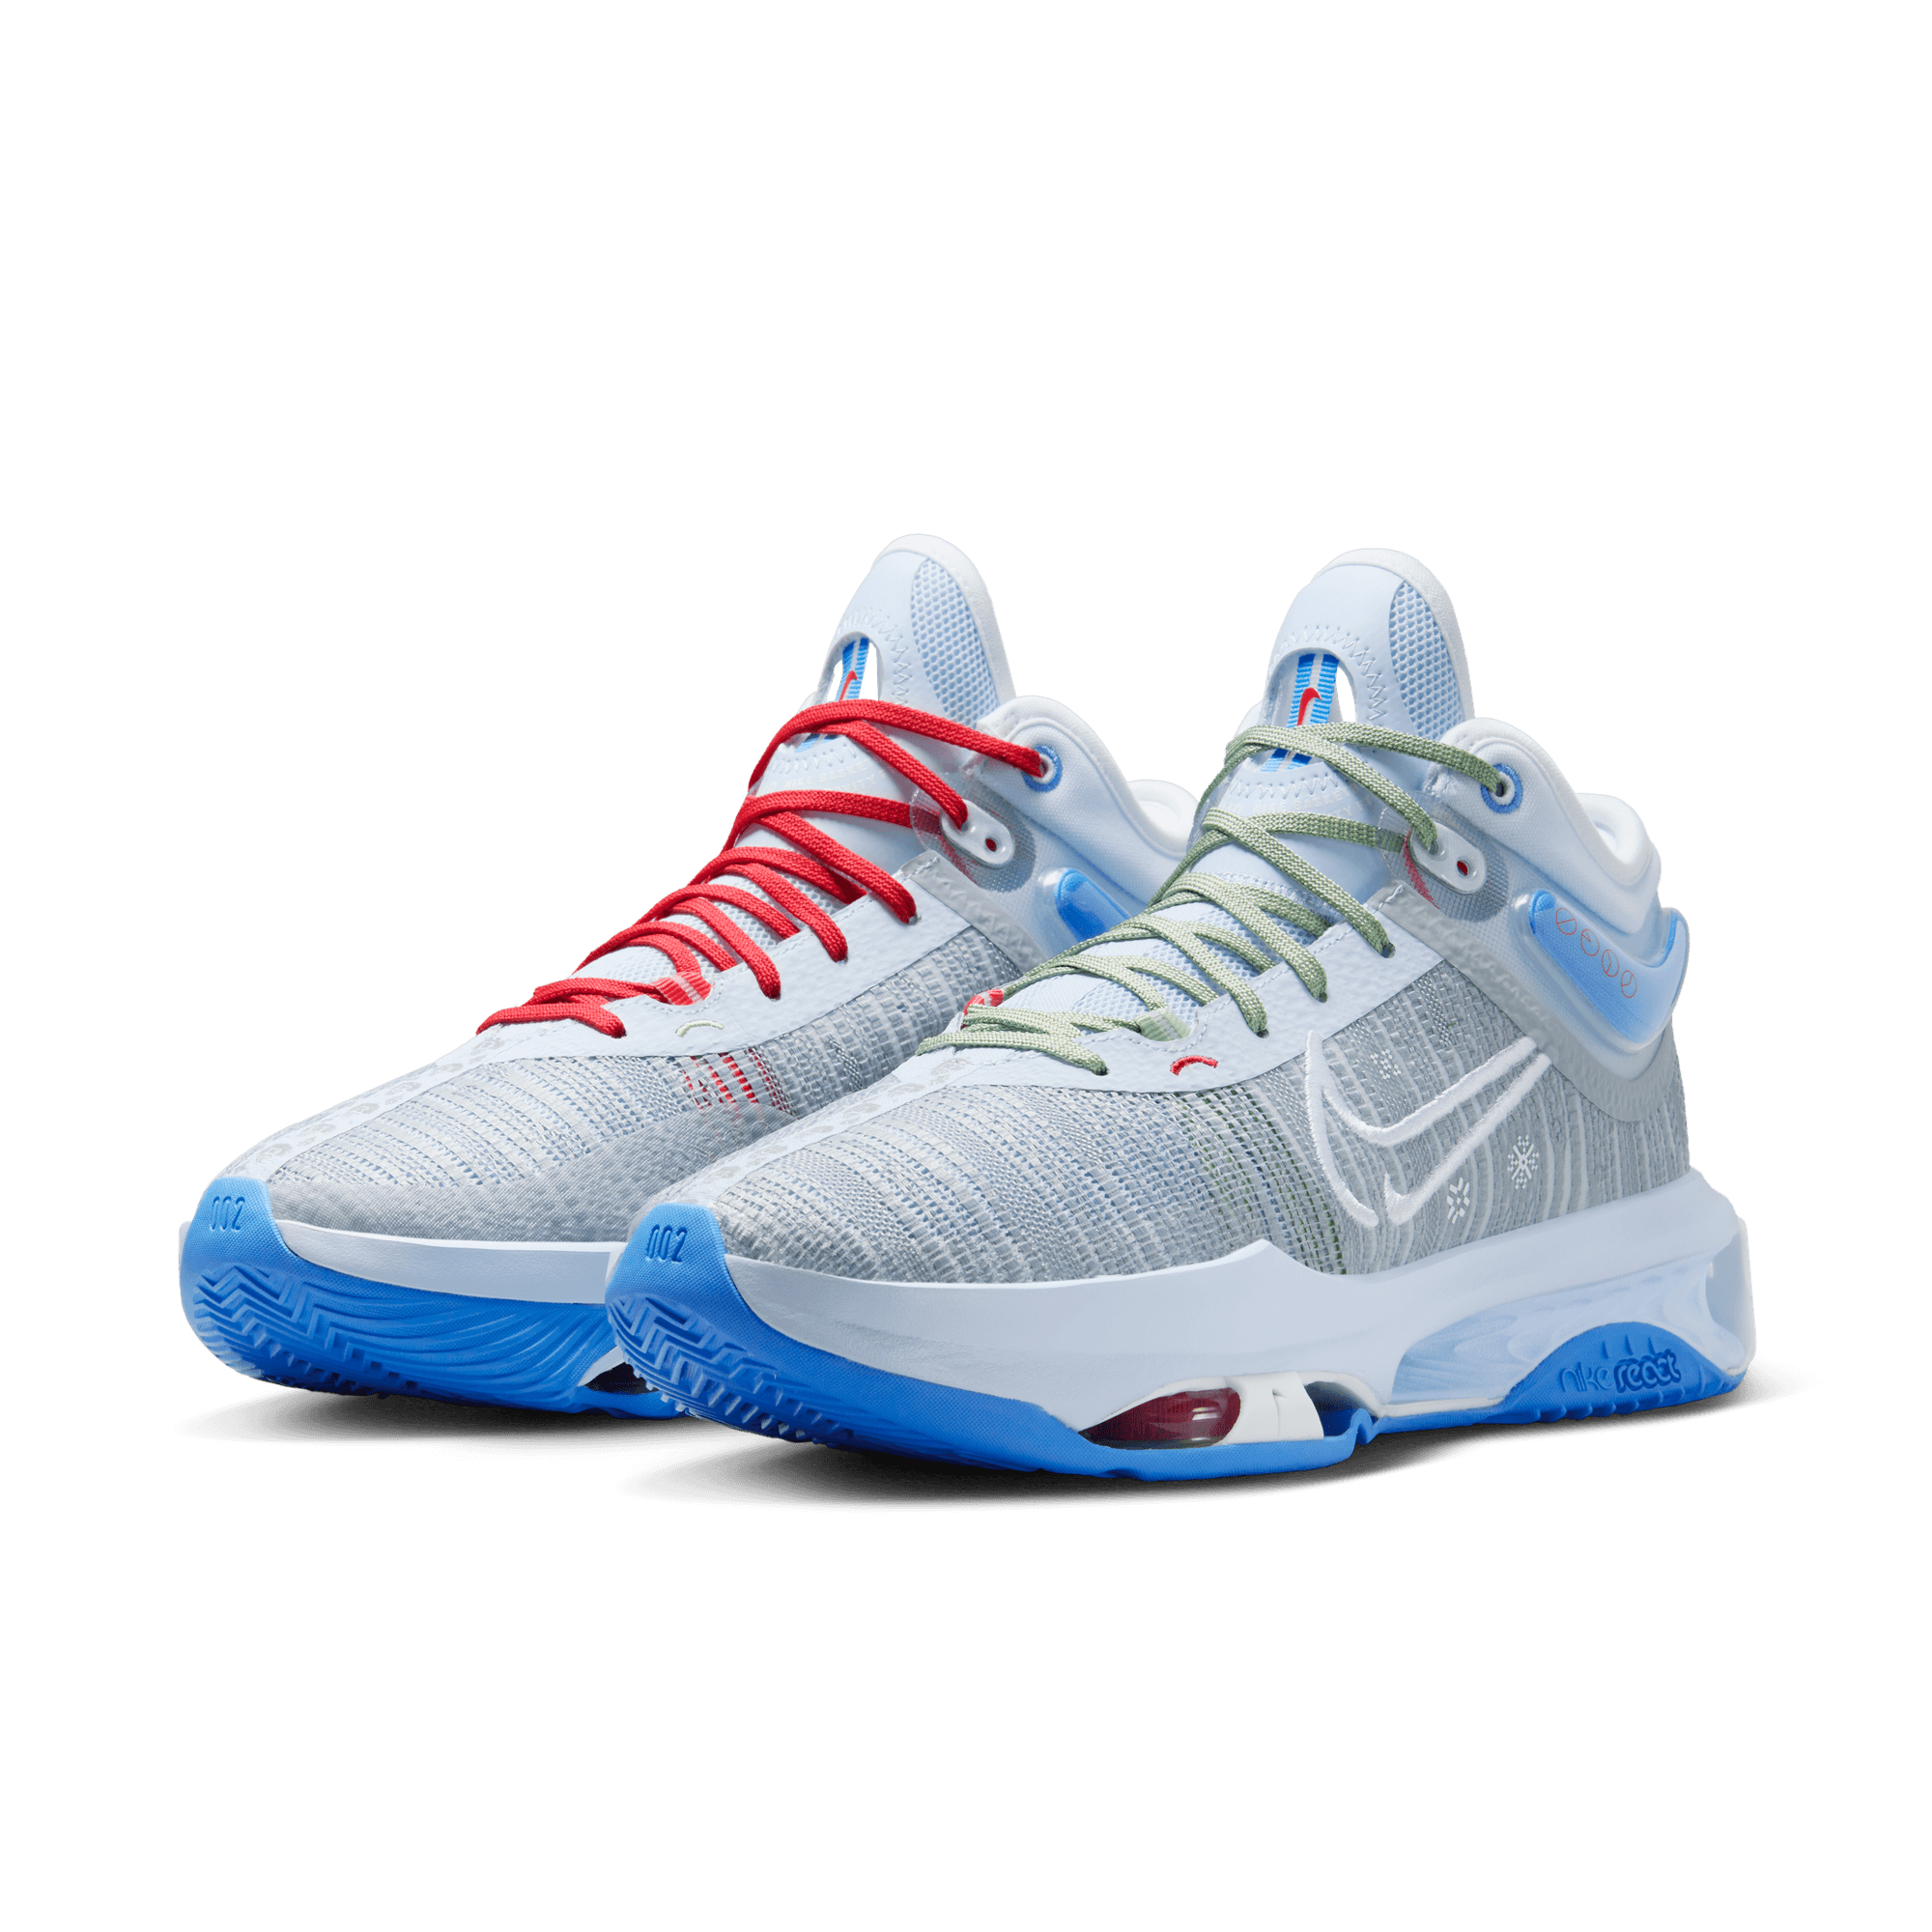 NIKE G.T. JUMP 2 EP MEN'S BASKETBALL SHOES WOLF GREY/WHITE-BLUE TINT ...